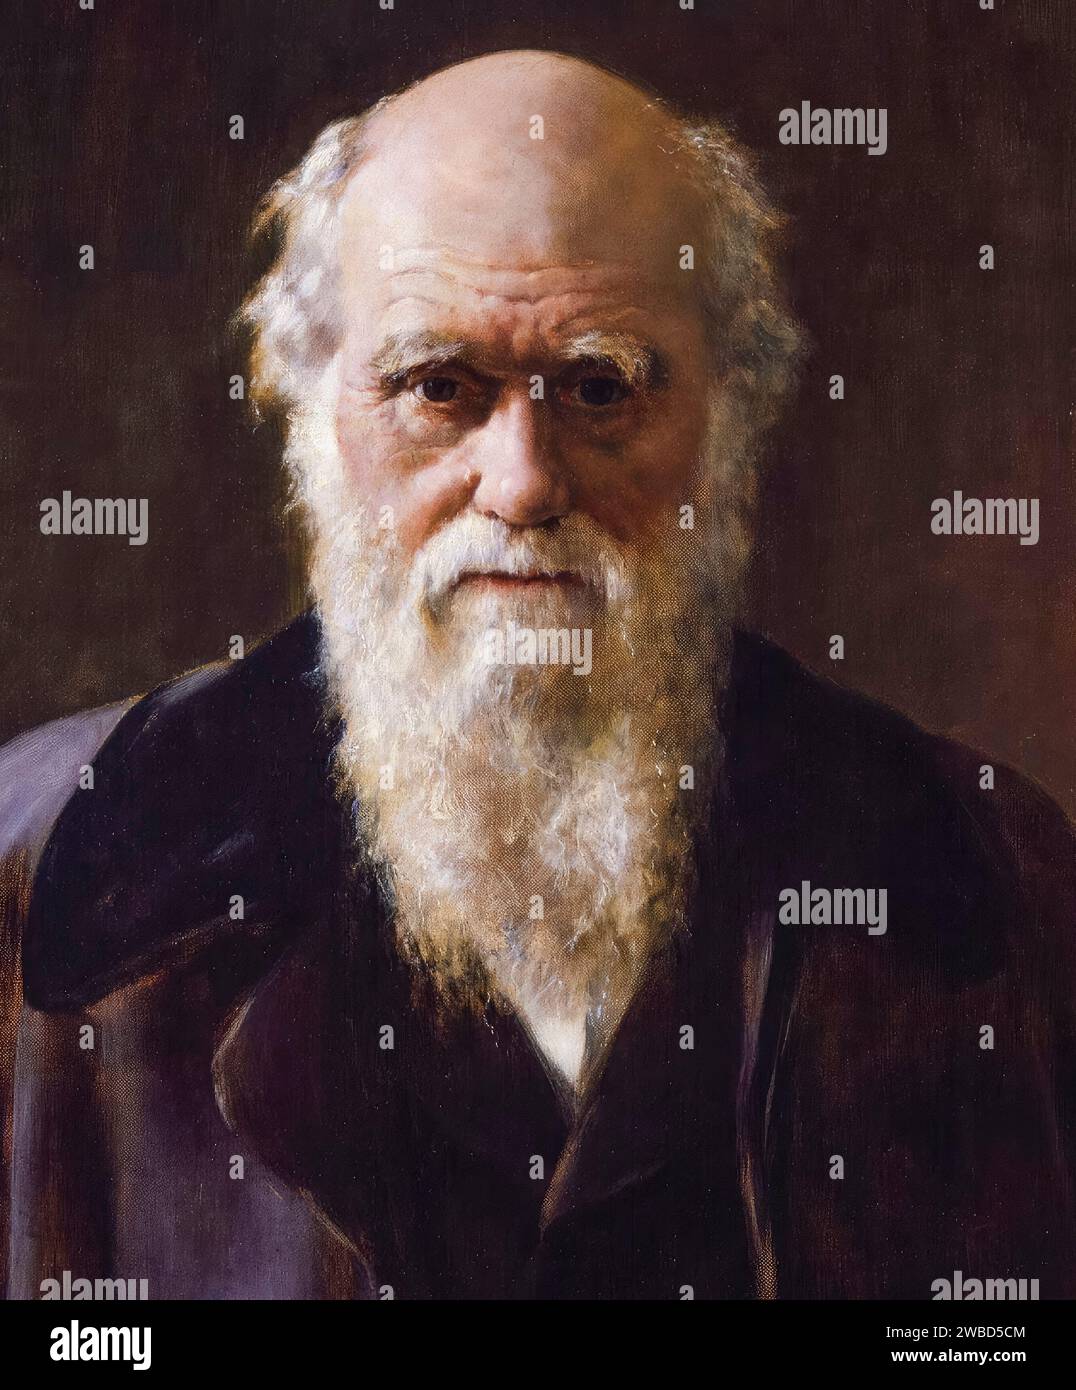 Charles Darwin, Portrait, of, Charles Robert Darwin, (1809-1882), English naturalist, geologist, and biologist, portrait painting in oil on canvas by John Collier, 1883 Stock Photo